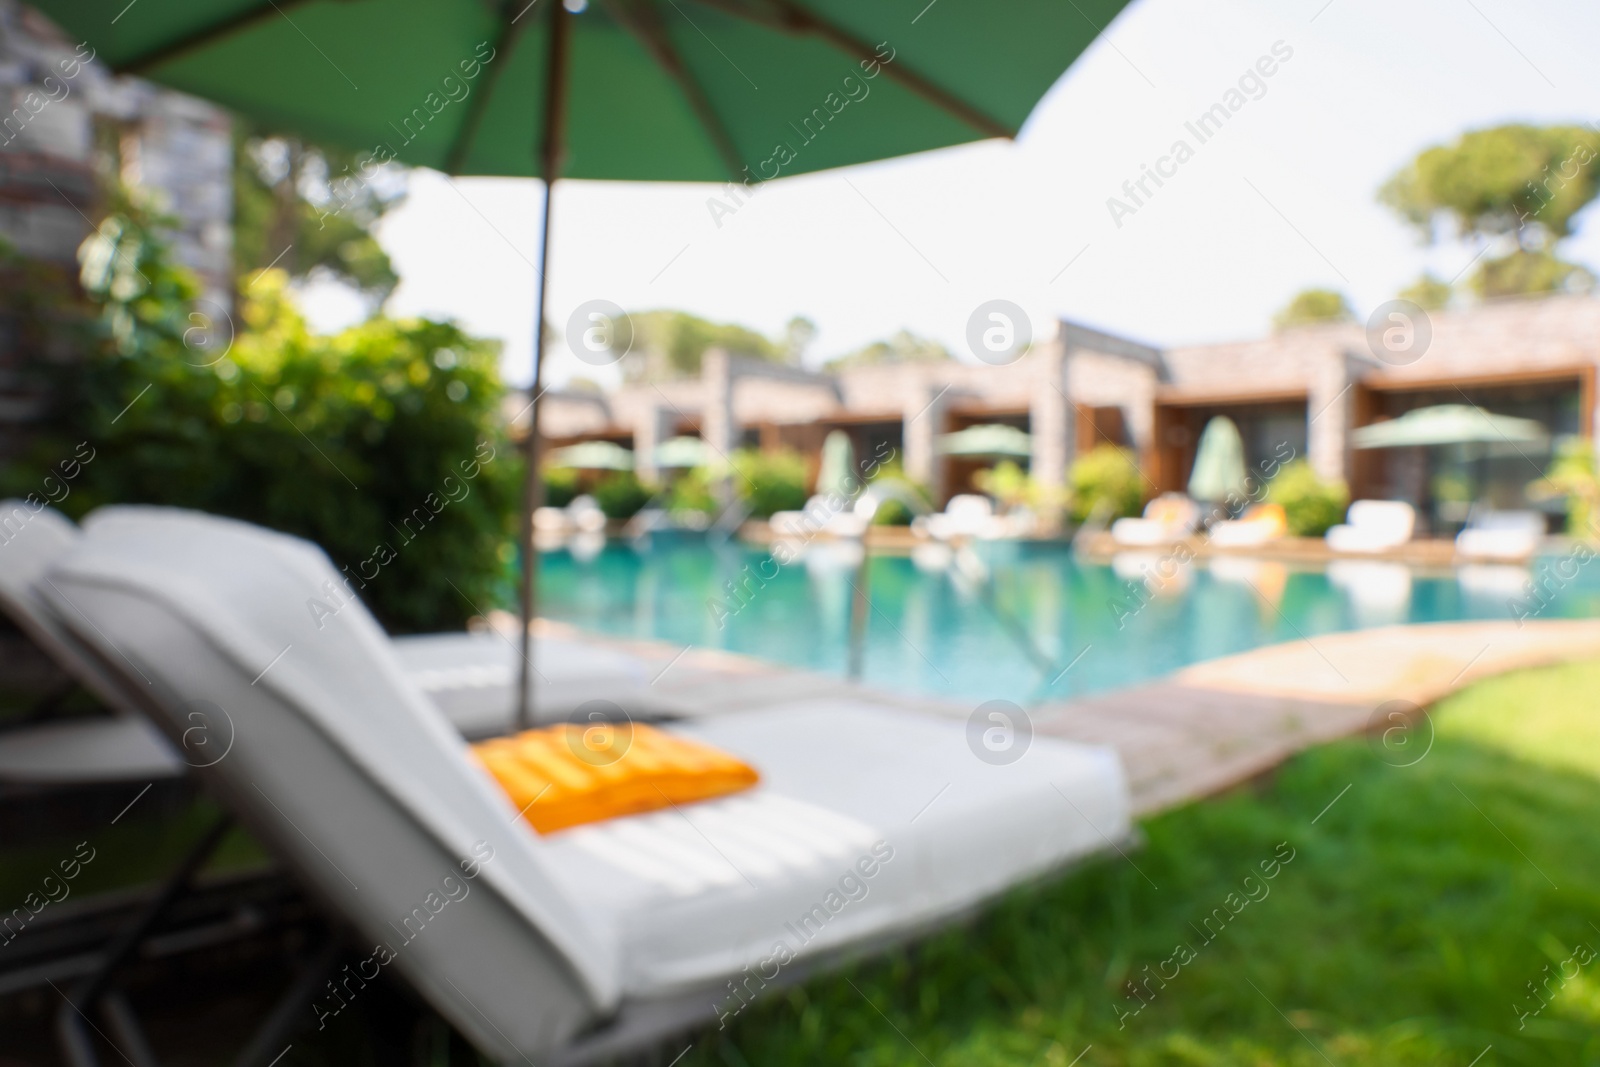 Photo of Sunbeds near swimming pool at luxury resort, blurred view